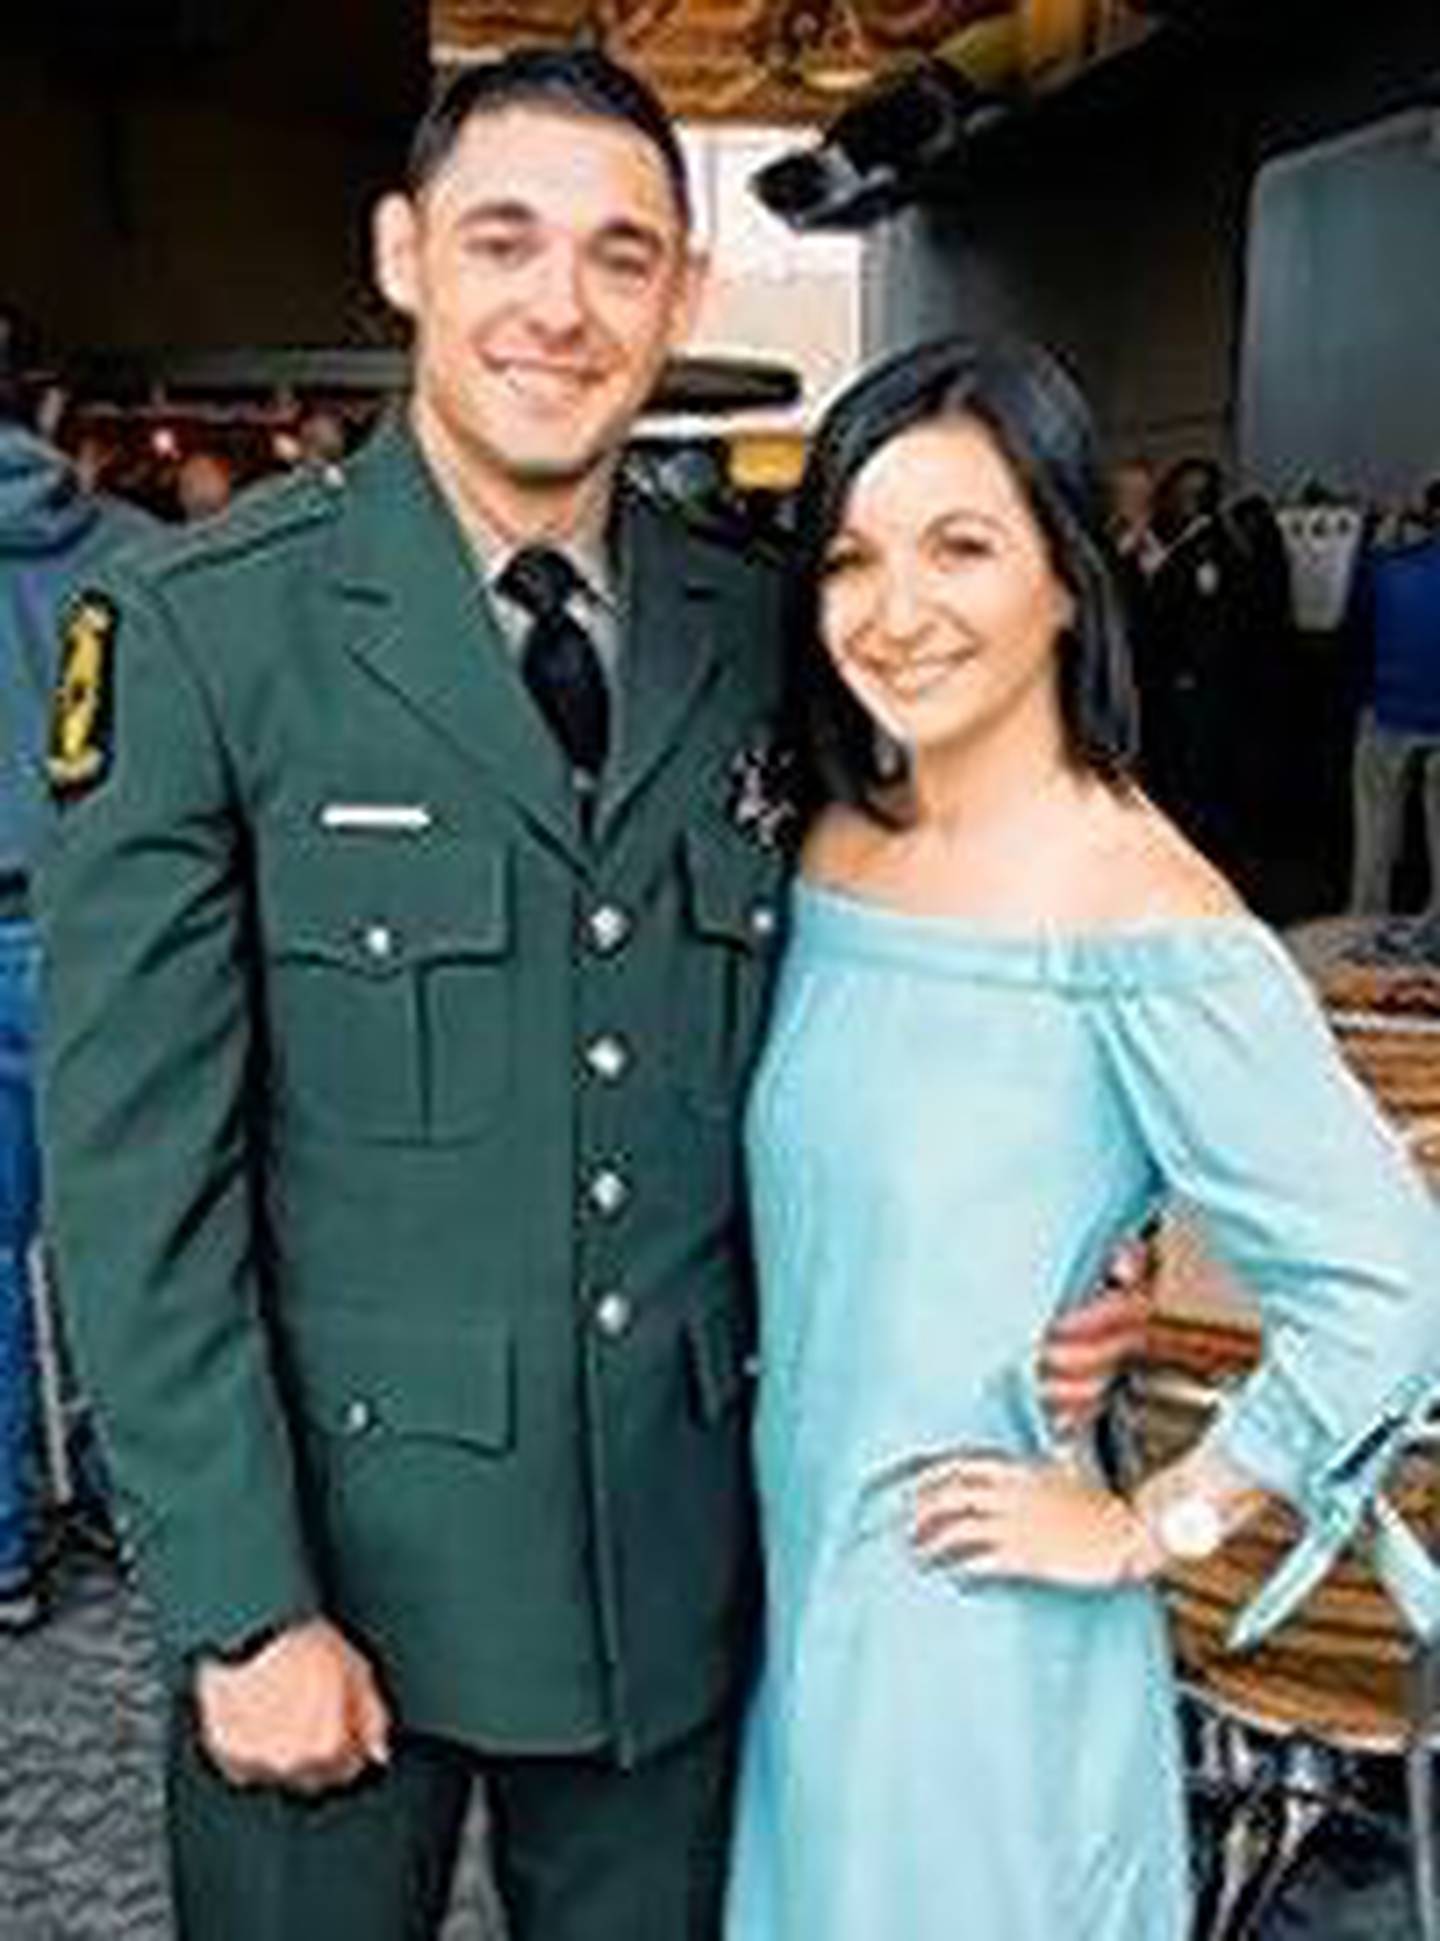 Lauren Frank and her husband, Illinois State Police Trooper Brian Frank, seen here in an undated photo, returned to their Lemont home Saturday two years after Brian suffered a traumatic brain injury while on duty.